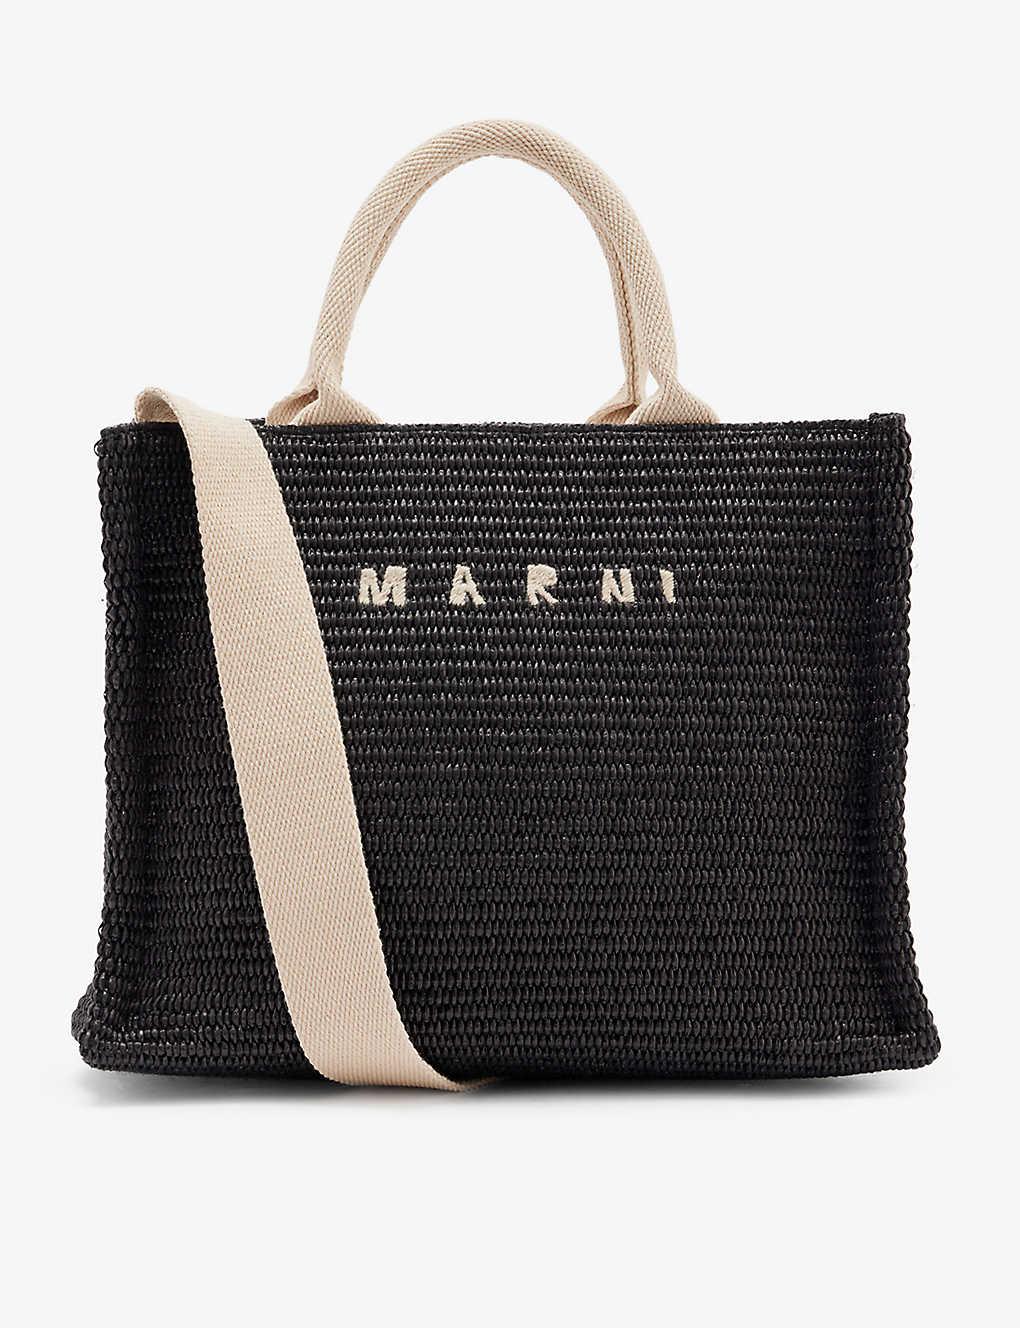 Marni East West Small Straw Tote Bag in Black | Lyst